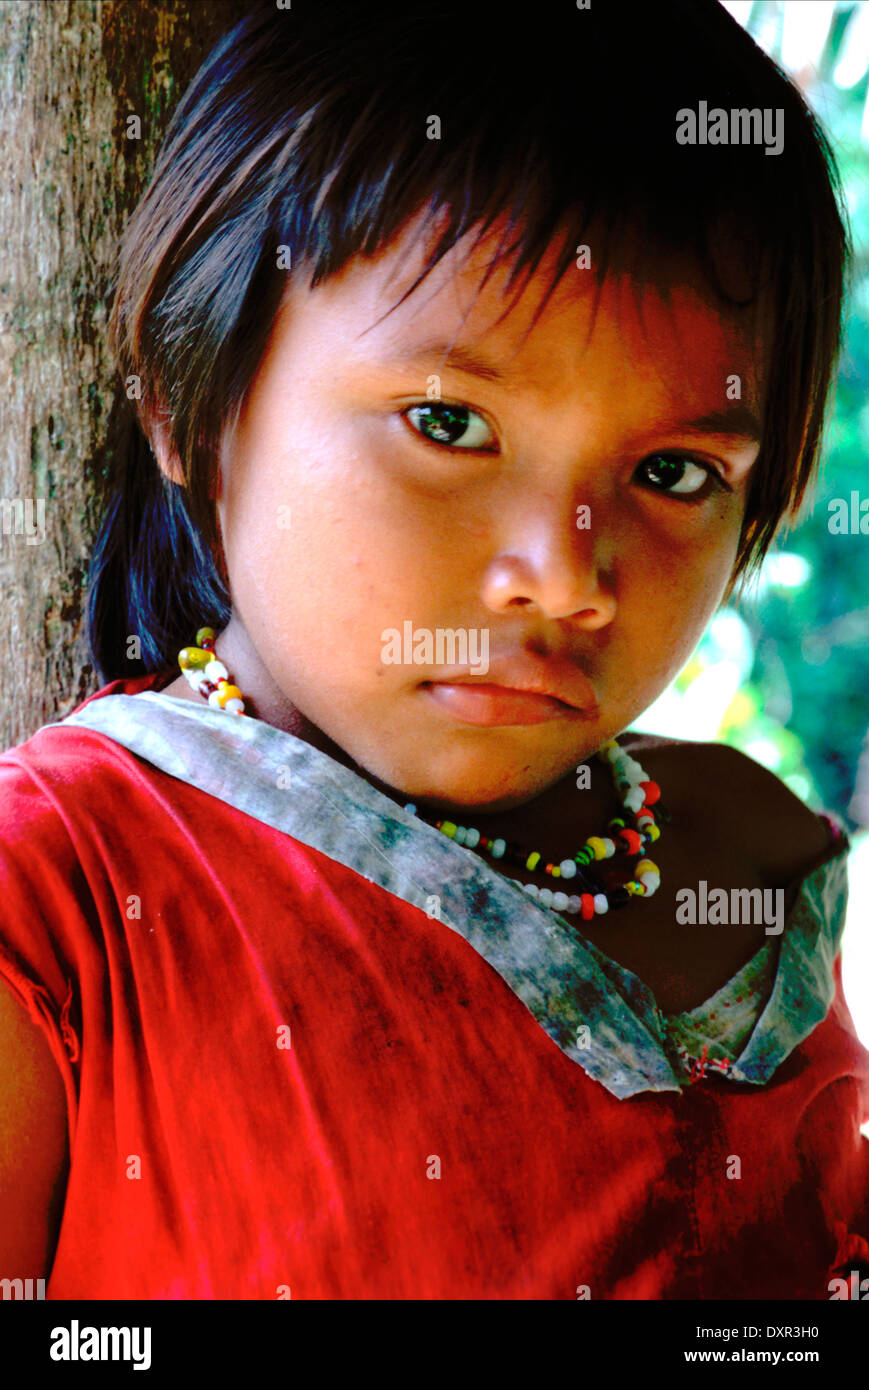 A girl portrait in the Orinoco River. The Warao are an indigenous people inhabiting northeastern Venezuela and western Guyana. Stock Photo